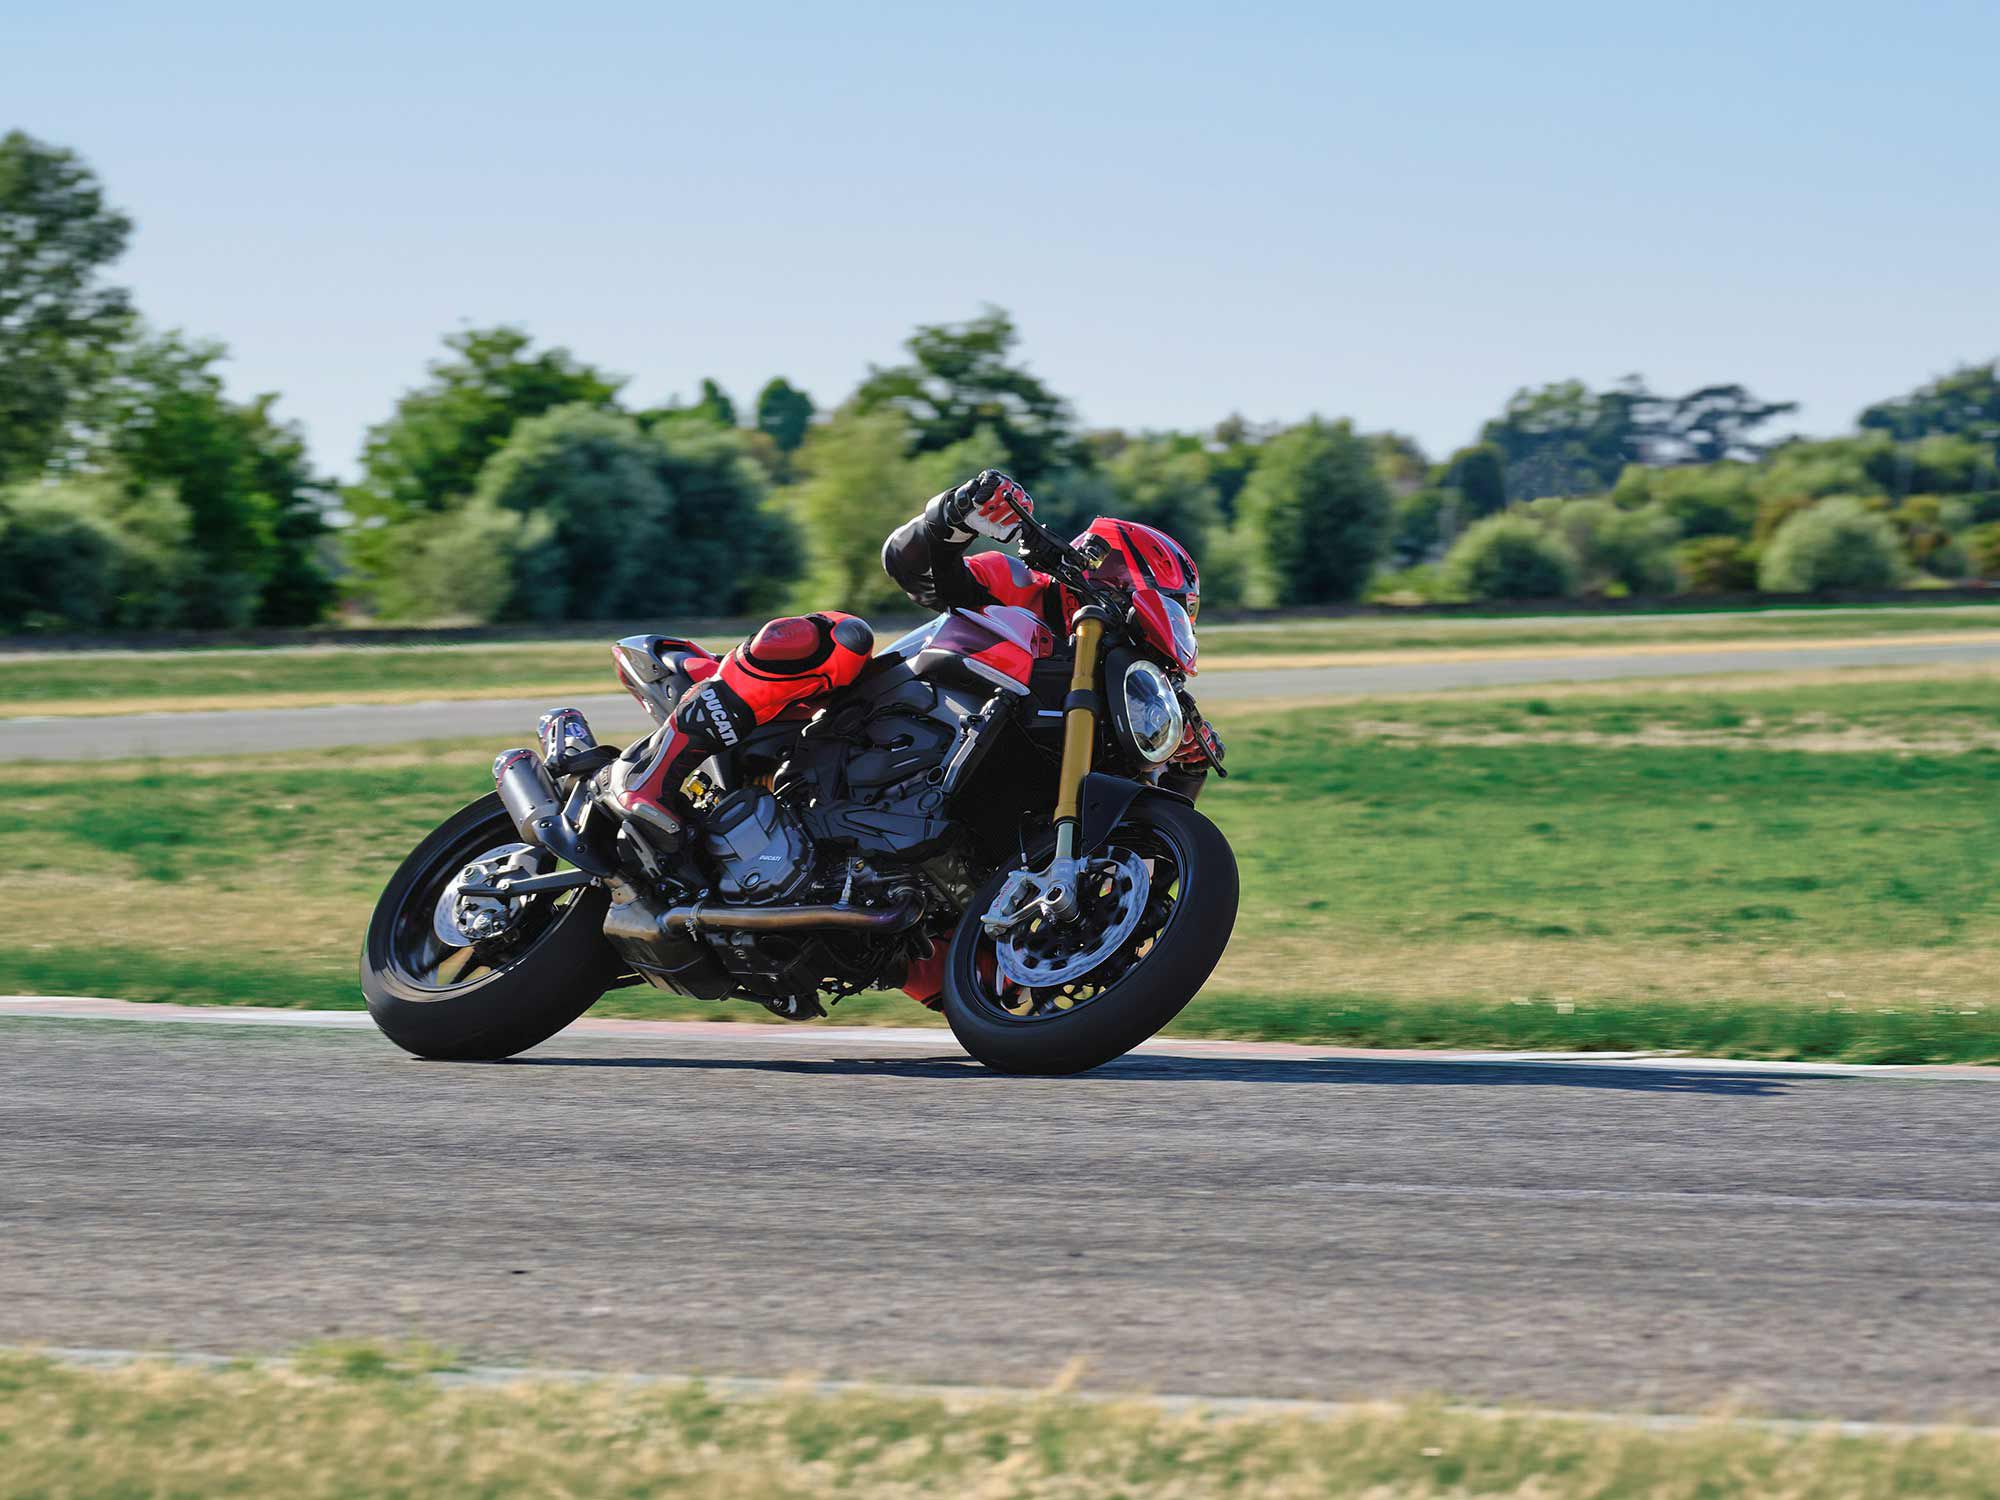 Higher-spec Brembo braking components improve the Monster SP’s ability to scrub speed.